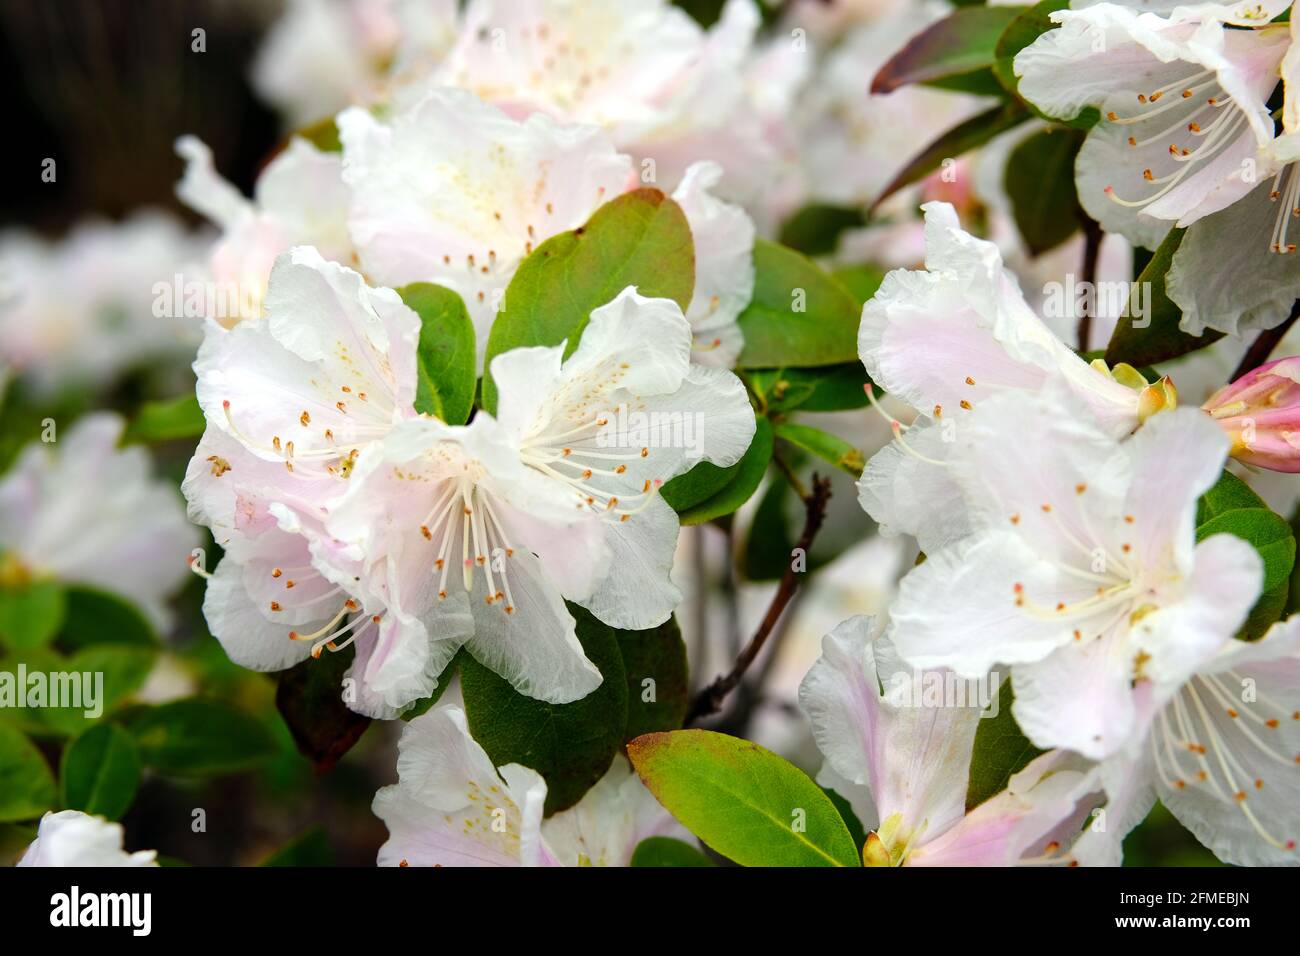 Beautiful white flowers of a rhododendron (Rhododendron maximum) in full bloom in a Glebe garden in Ottawa, Ontario, Canada. Stock Photo